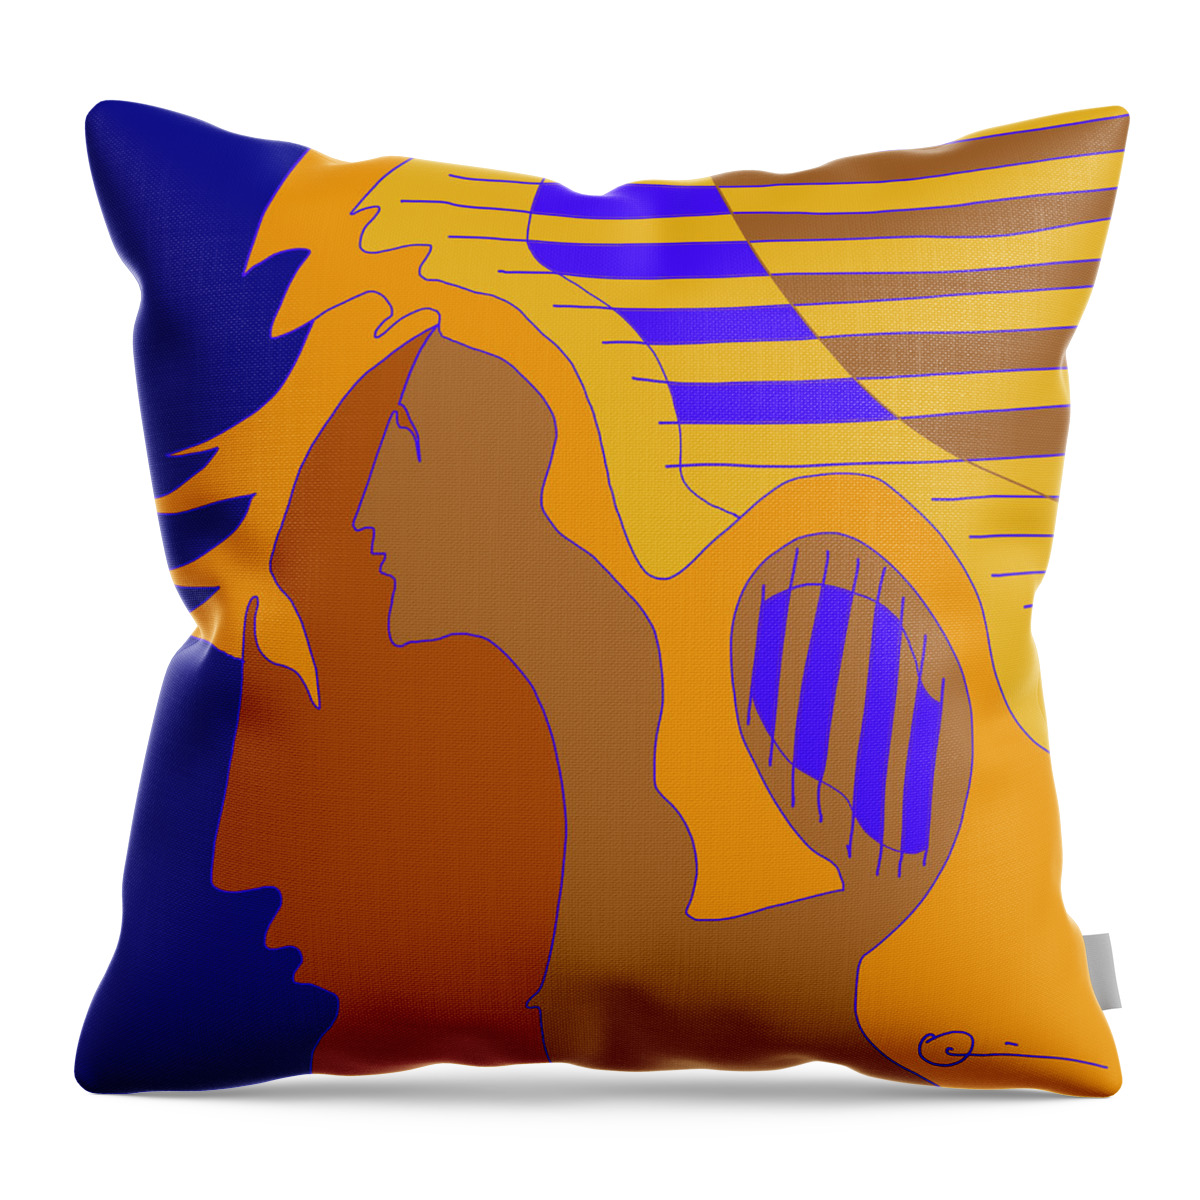 Quiros Throw Pillow featuring the digital art Brushed by Jeffrey Quiros